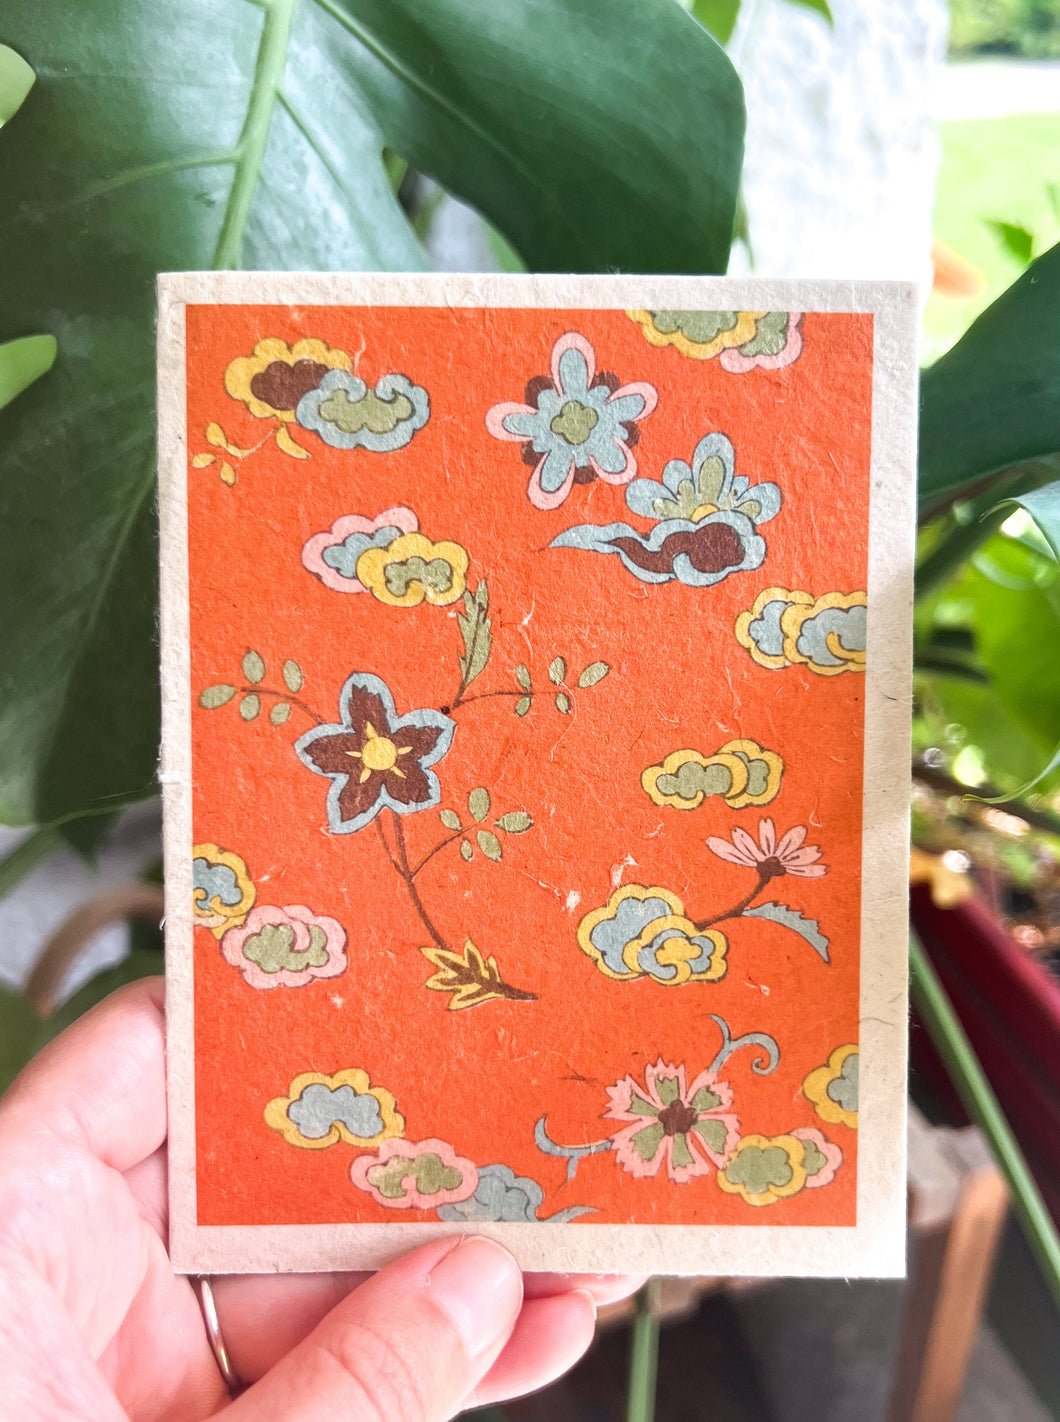 Japanese Plantable Seed Card || Zero Waste || Supports Women || Eco-friendly || J50